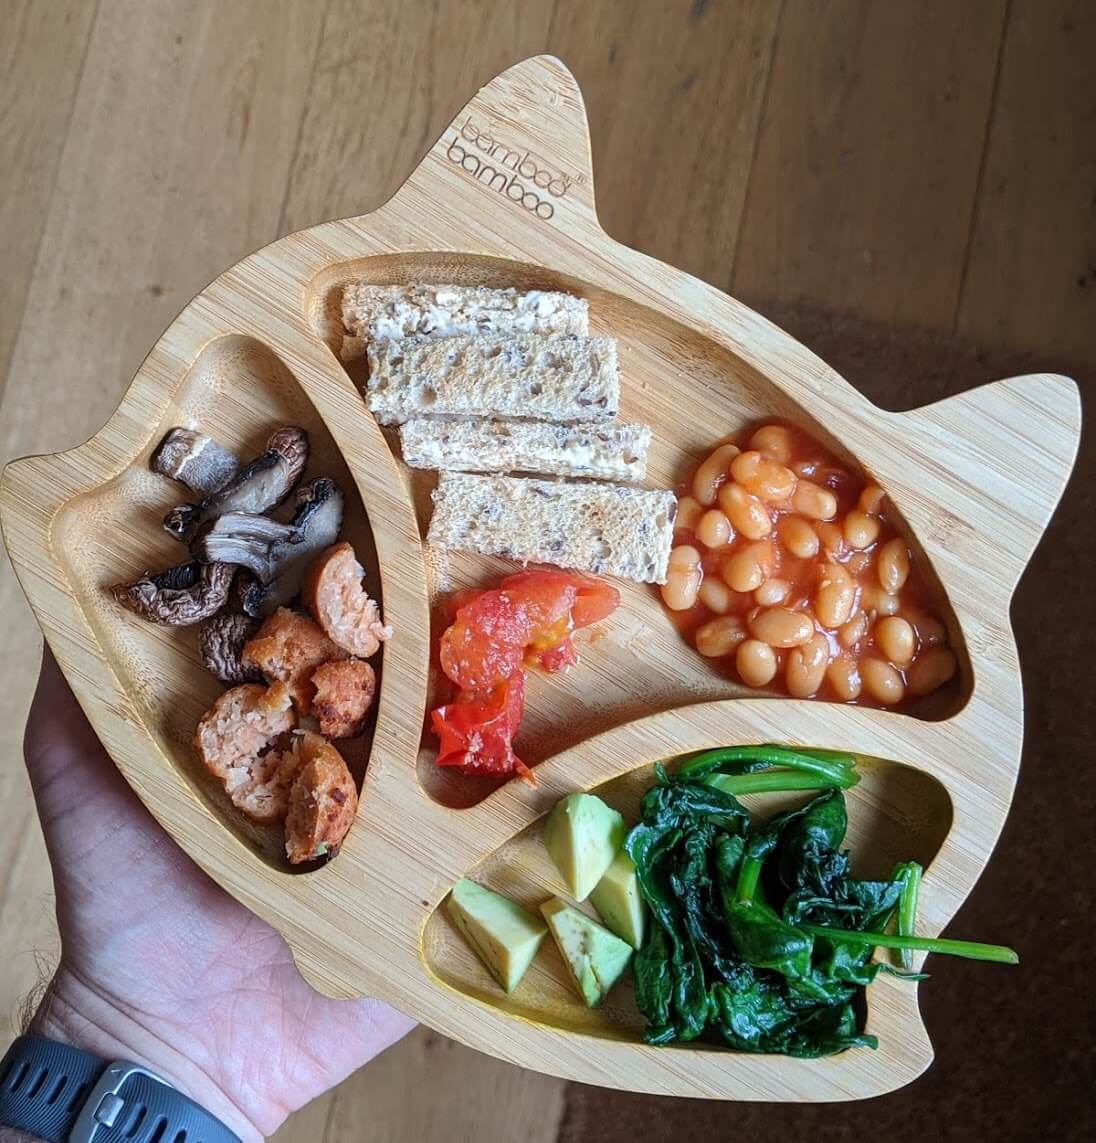 Toast fingers, baked beans, roasted tomatoes, sauted spinach, avocado, fried mushrooms and vegan sausage on Brandon's bamboo plate